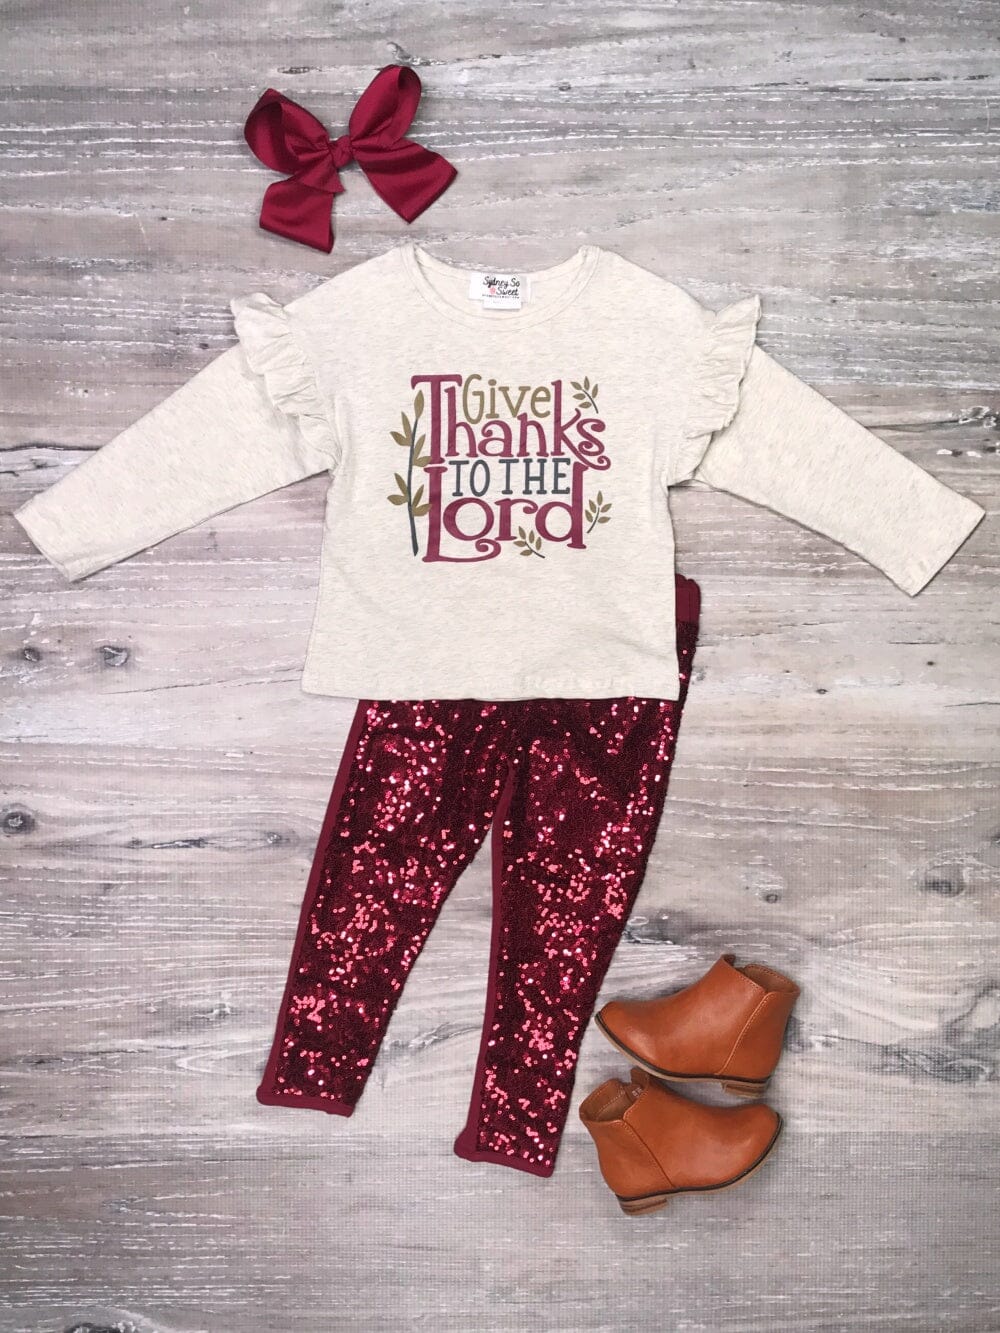 Give Thanks To The Lord Burgundy Sequin Ruffle Girls Outfit - Sydney So Sweet